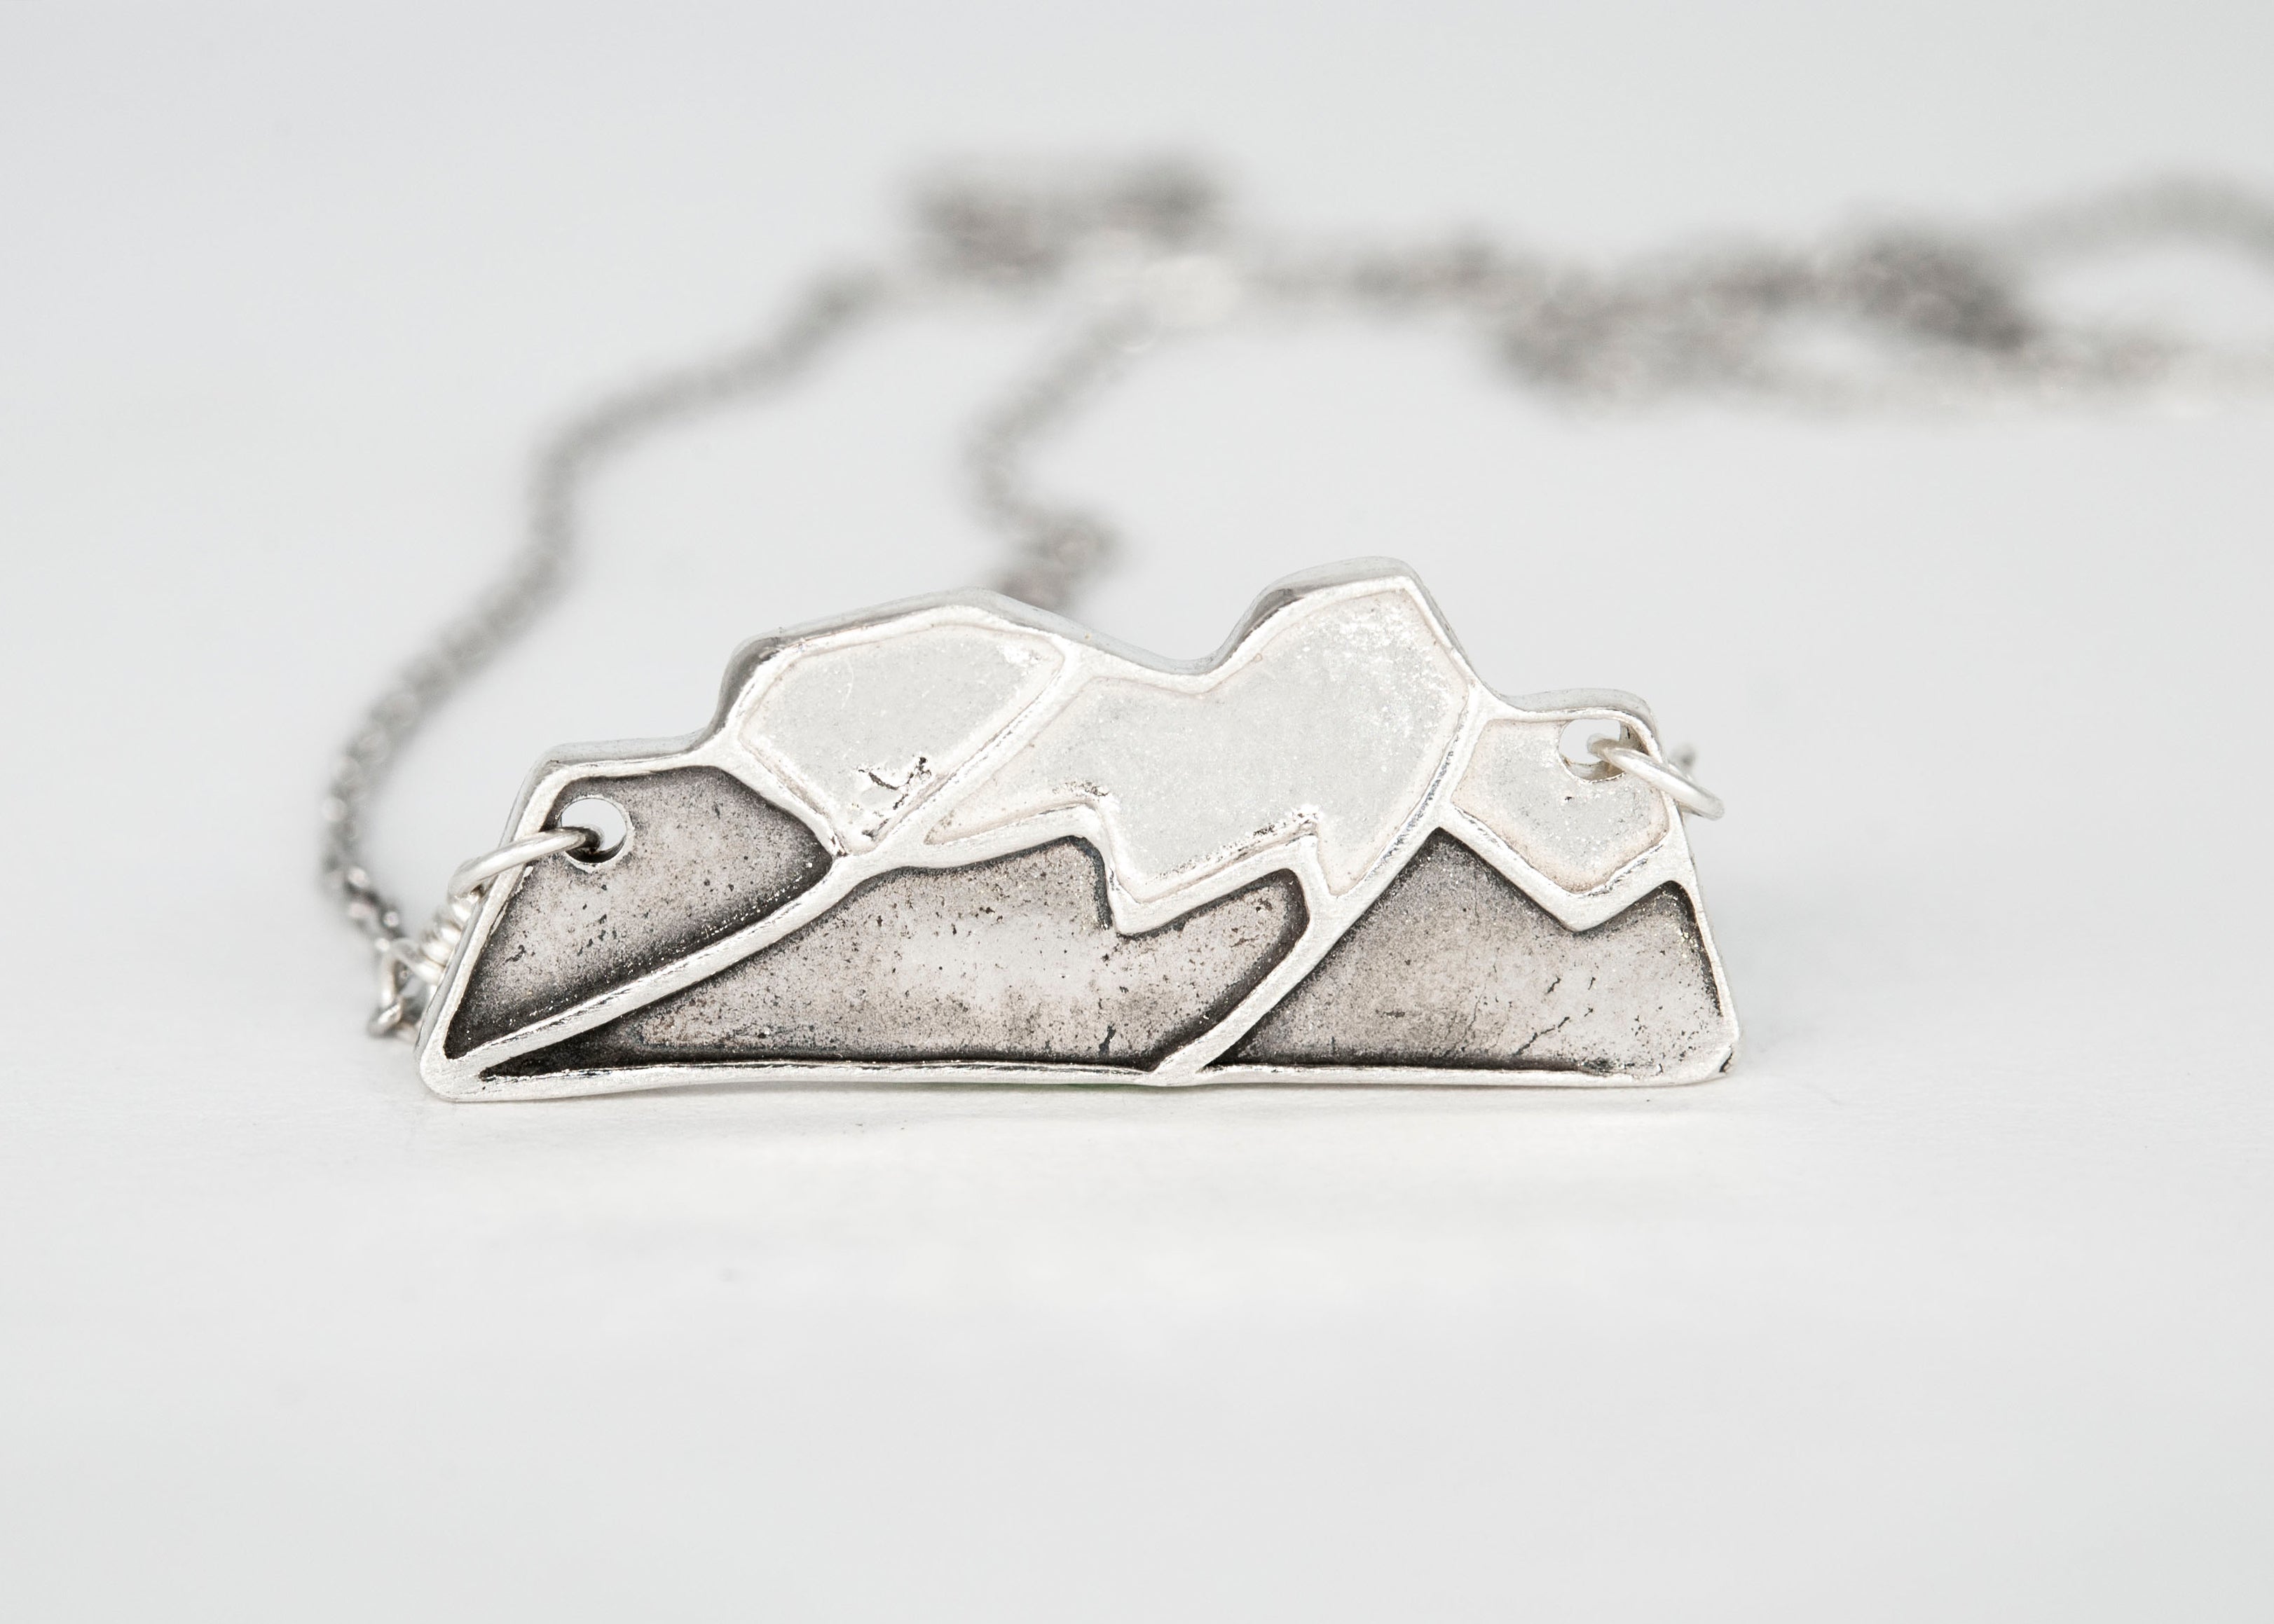 Mount Edith Cavell Necklace